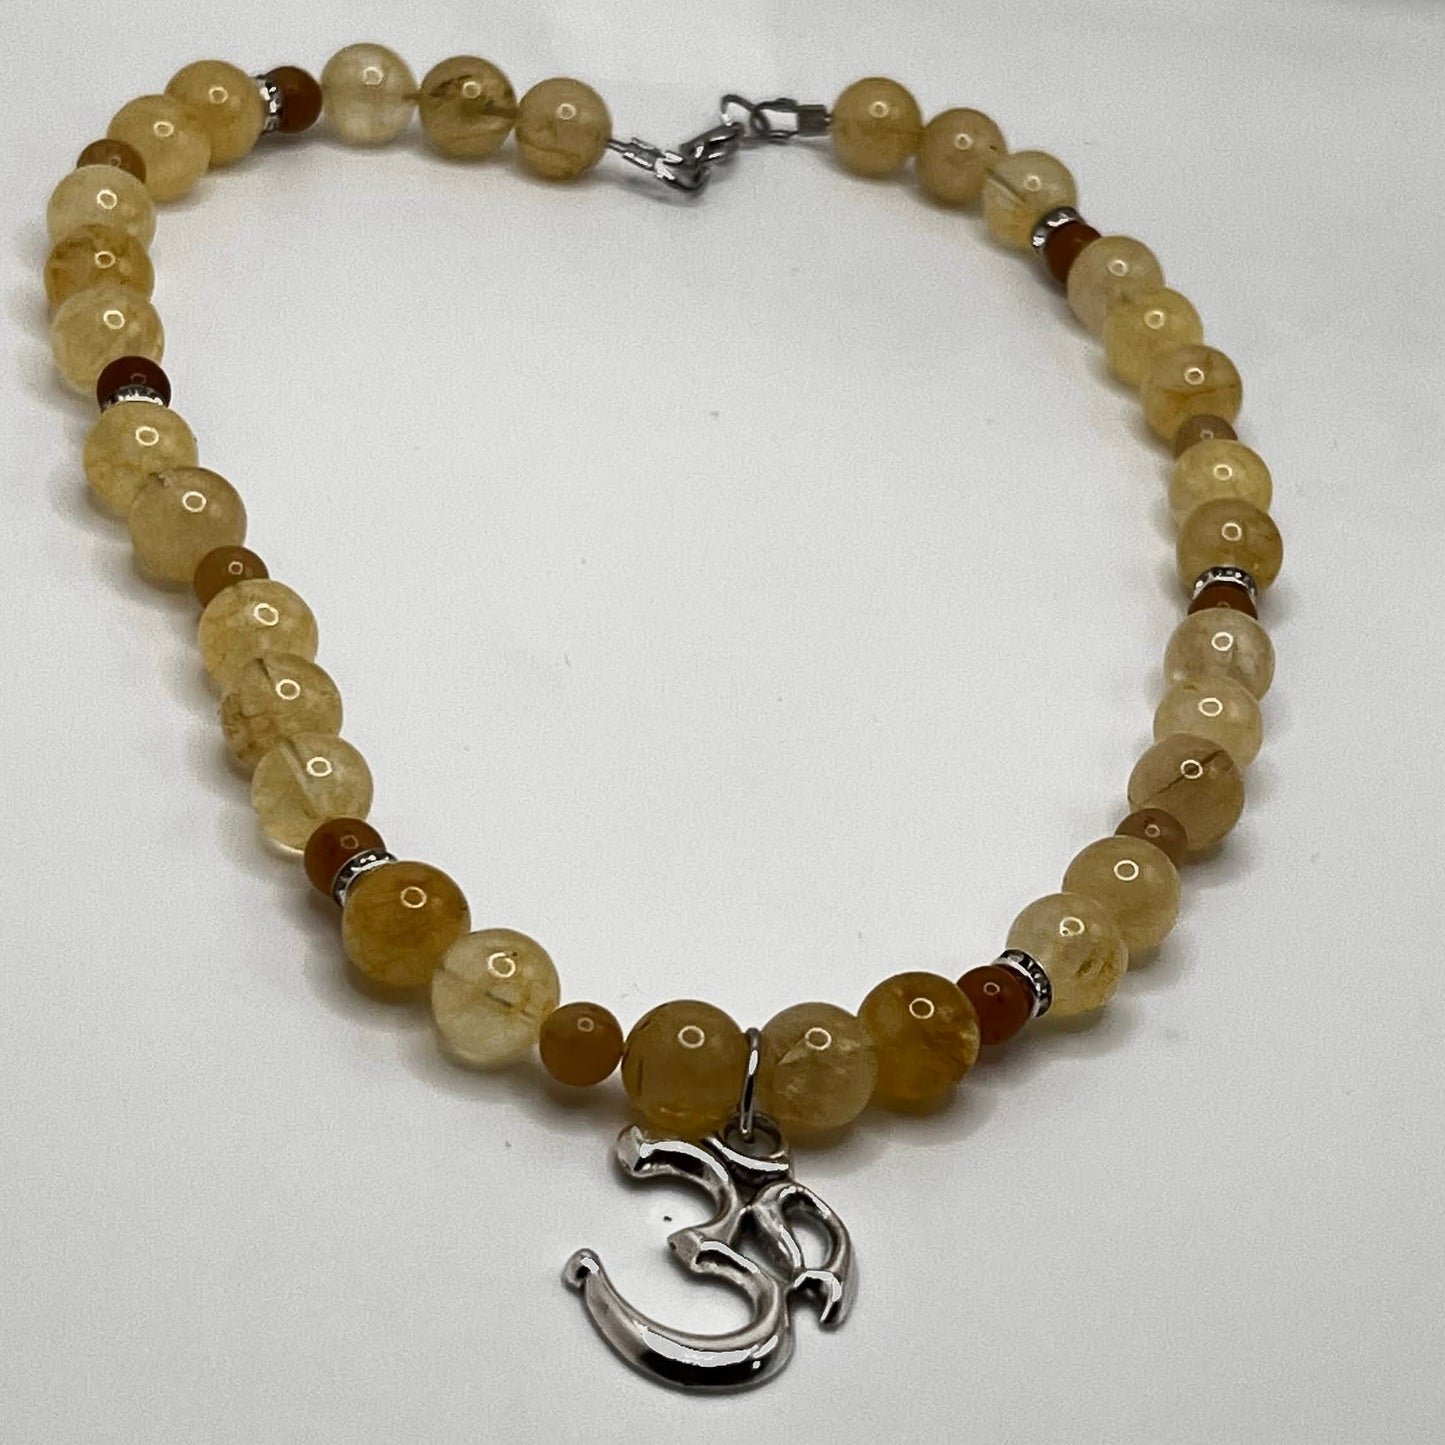 citrine and Amber necklace-citrine's healing properties include improving digestion and strengthening endurance , Amber is said to improve self-esteem and confidence